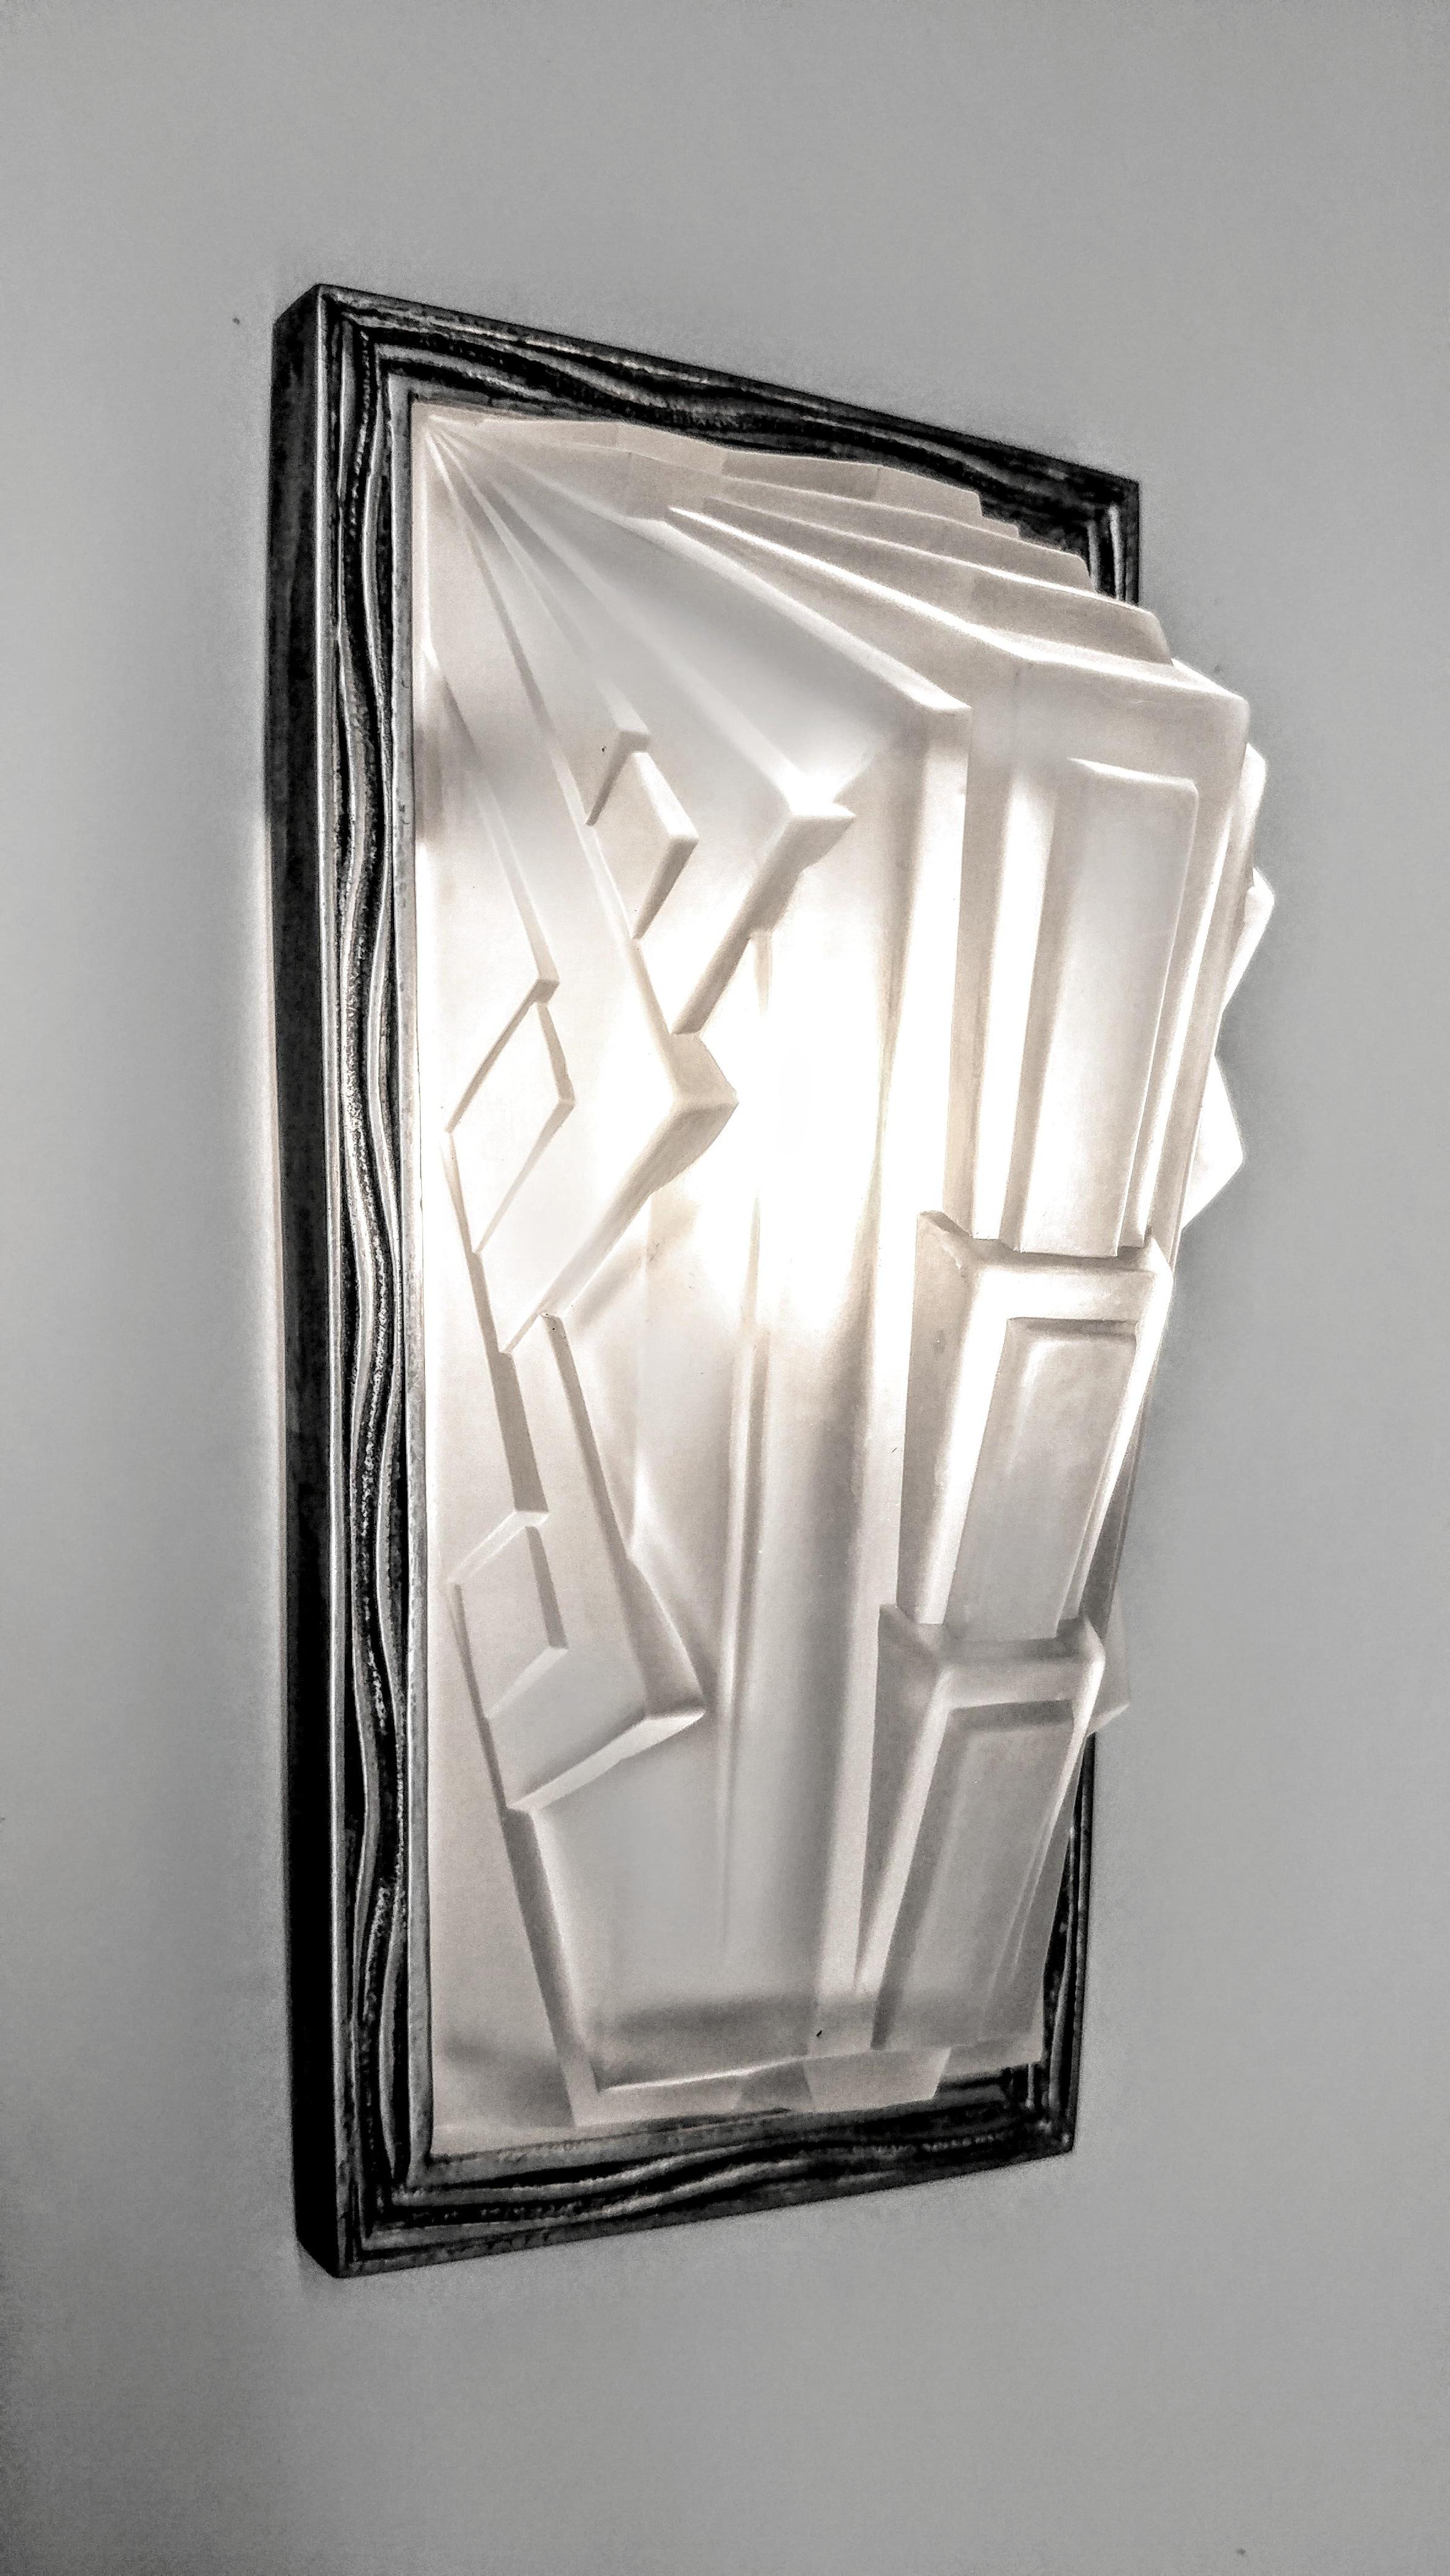 Pair of French Art Deco Wall Sconces by Sabino In Good Condition For Sale In Long Island City, NY